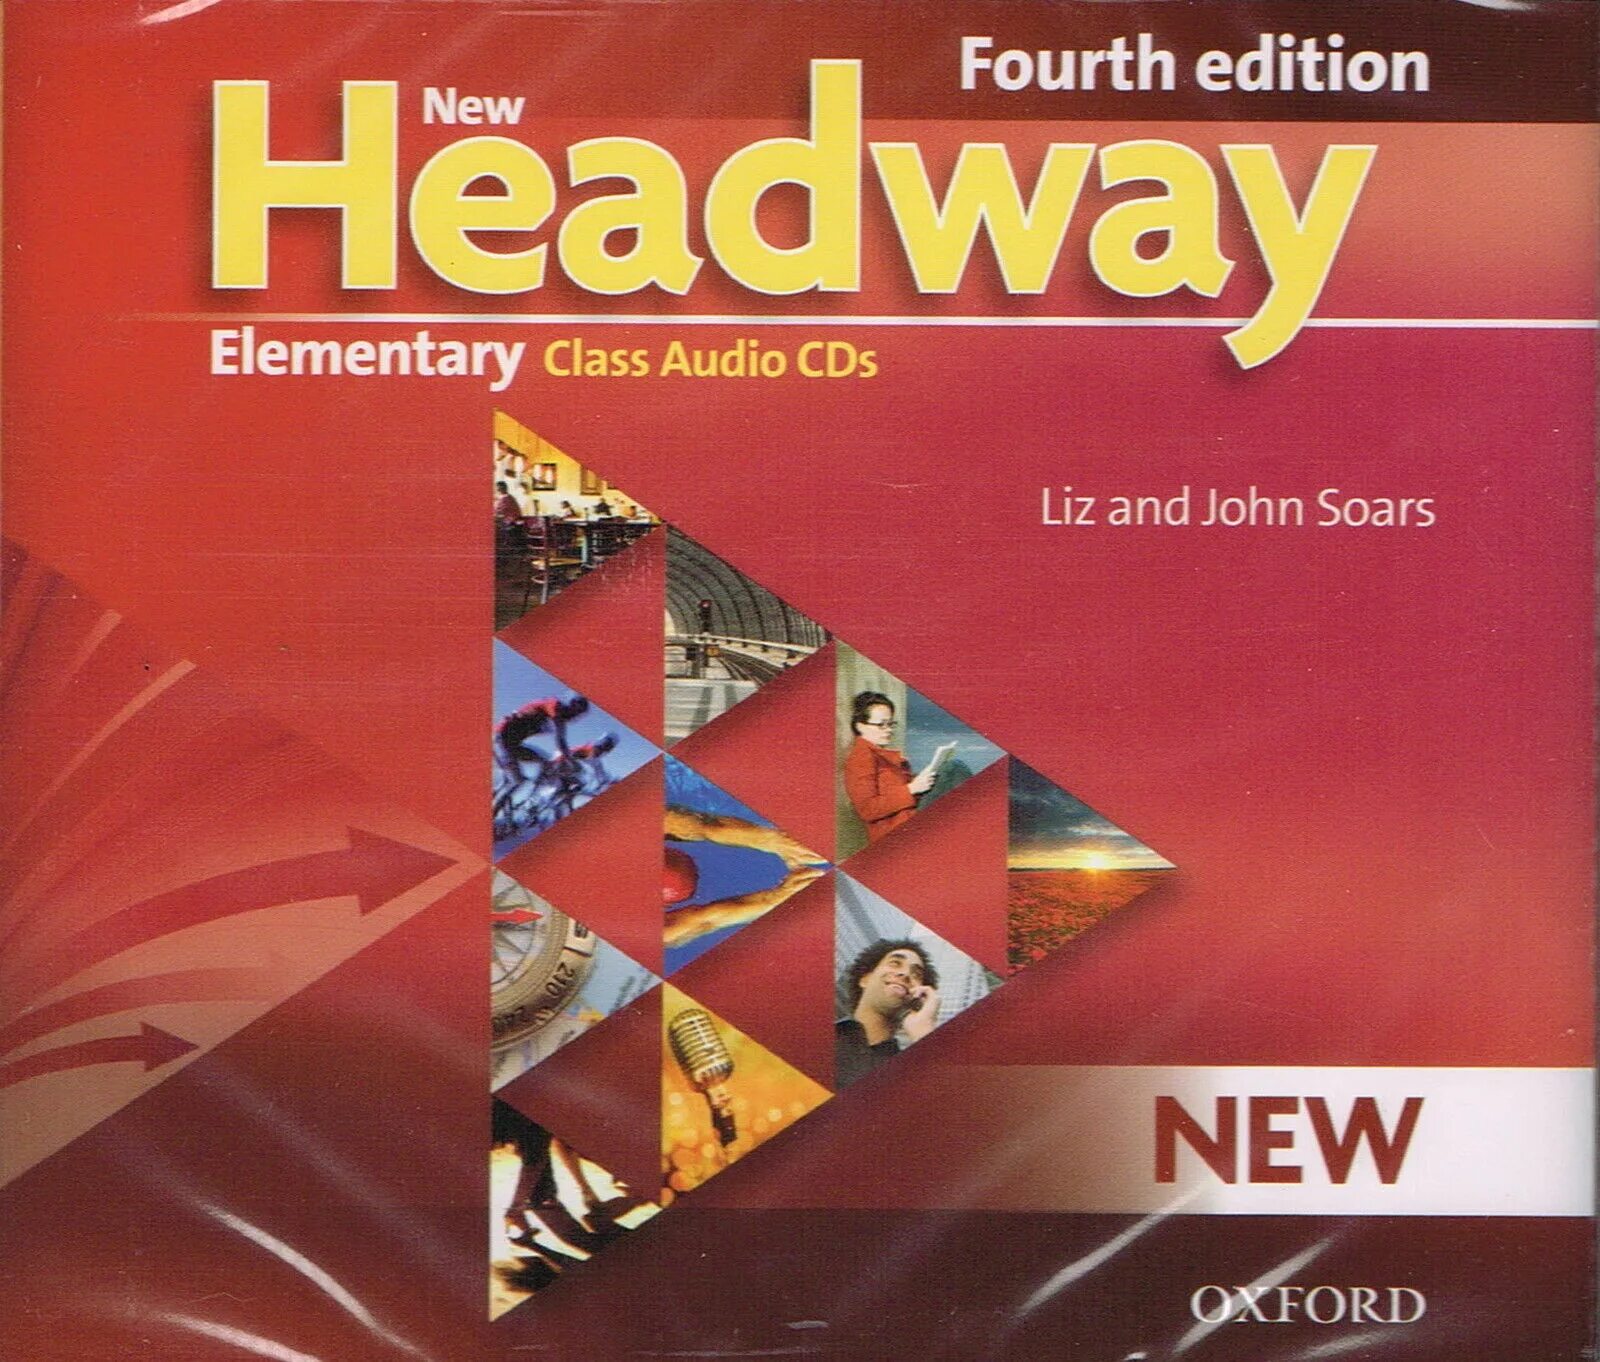 New Headway 4th Edition. Тест Headway Elementary 4 Edition. Headway Elementary 4th Edition Audio. New Headway Elementary 4 Edition. Headway elementary student